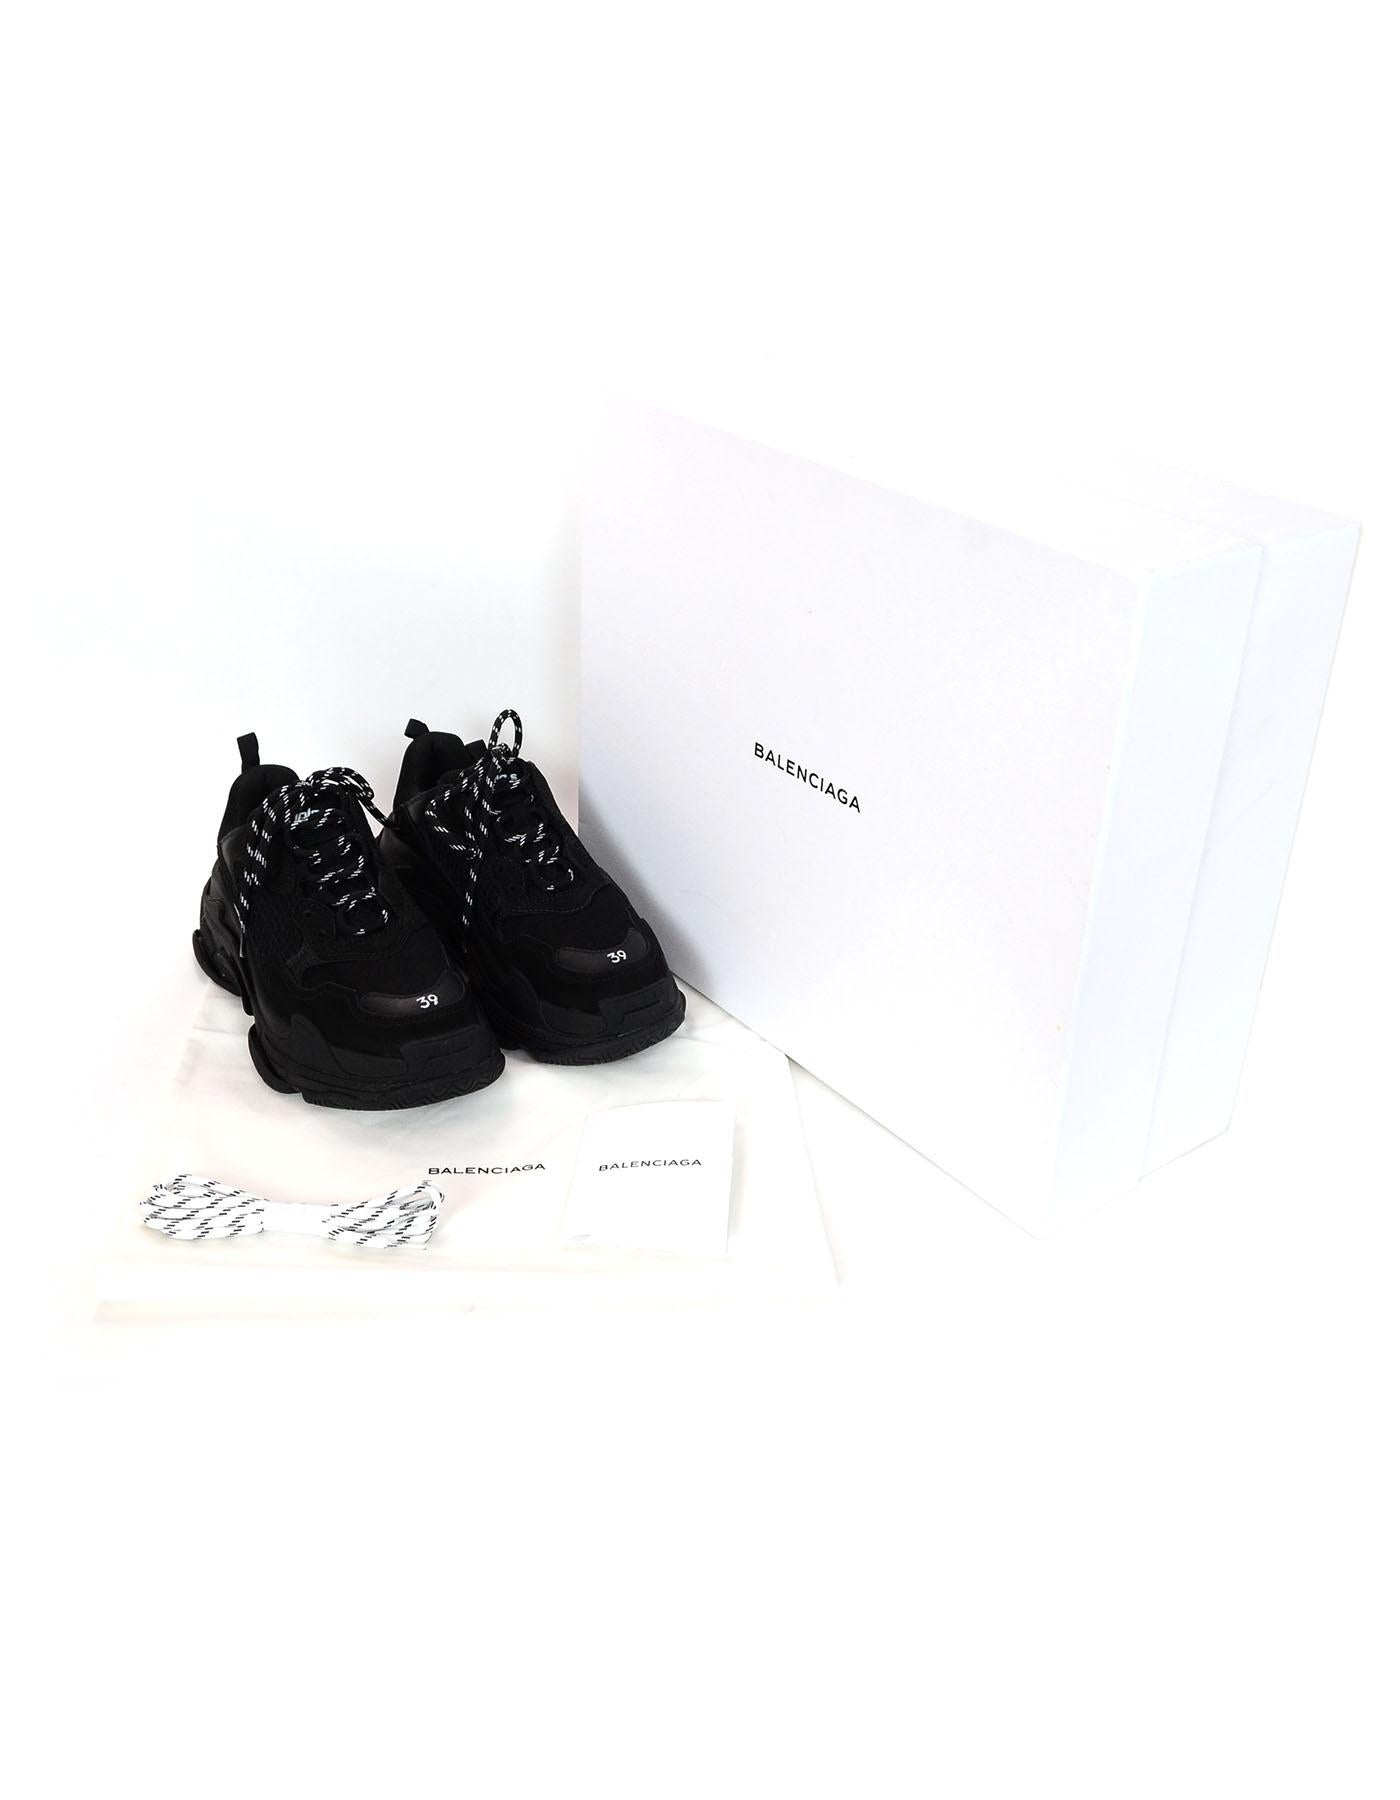 Balenciaga Black Triple S Trainers sz 39
American style oversized sneakers with black and white laces

Made In: Italy
Color: Black
Materials: Nubuck and meshes- 60% Polyester, 25% Calfskin, 15% Lambskin
Closure/Opening: Lace up
Sole Stamp: